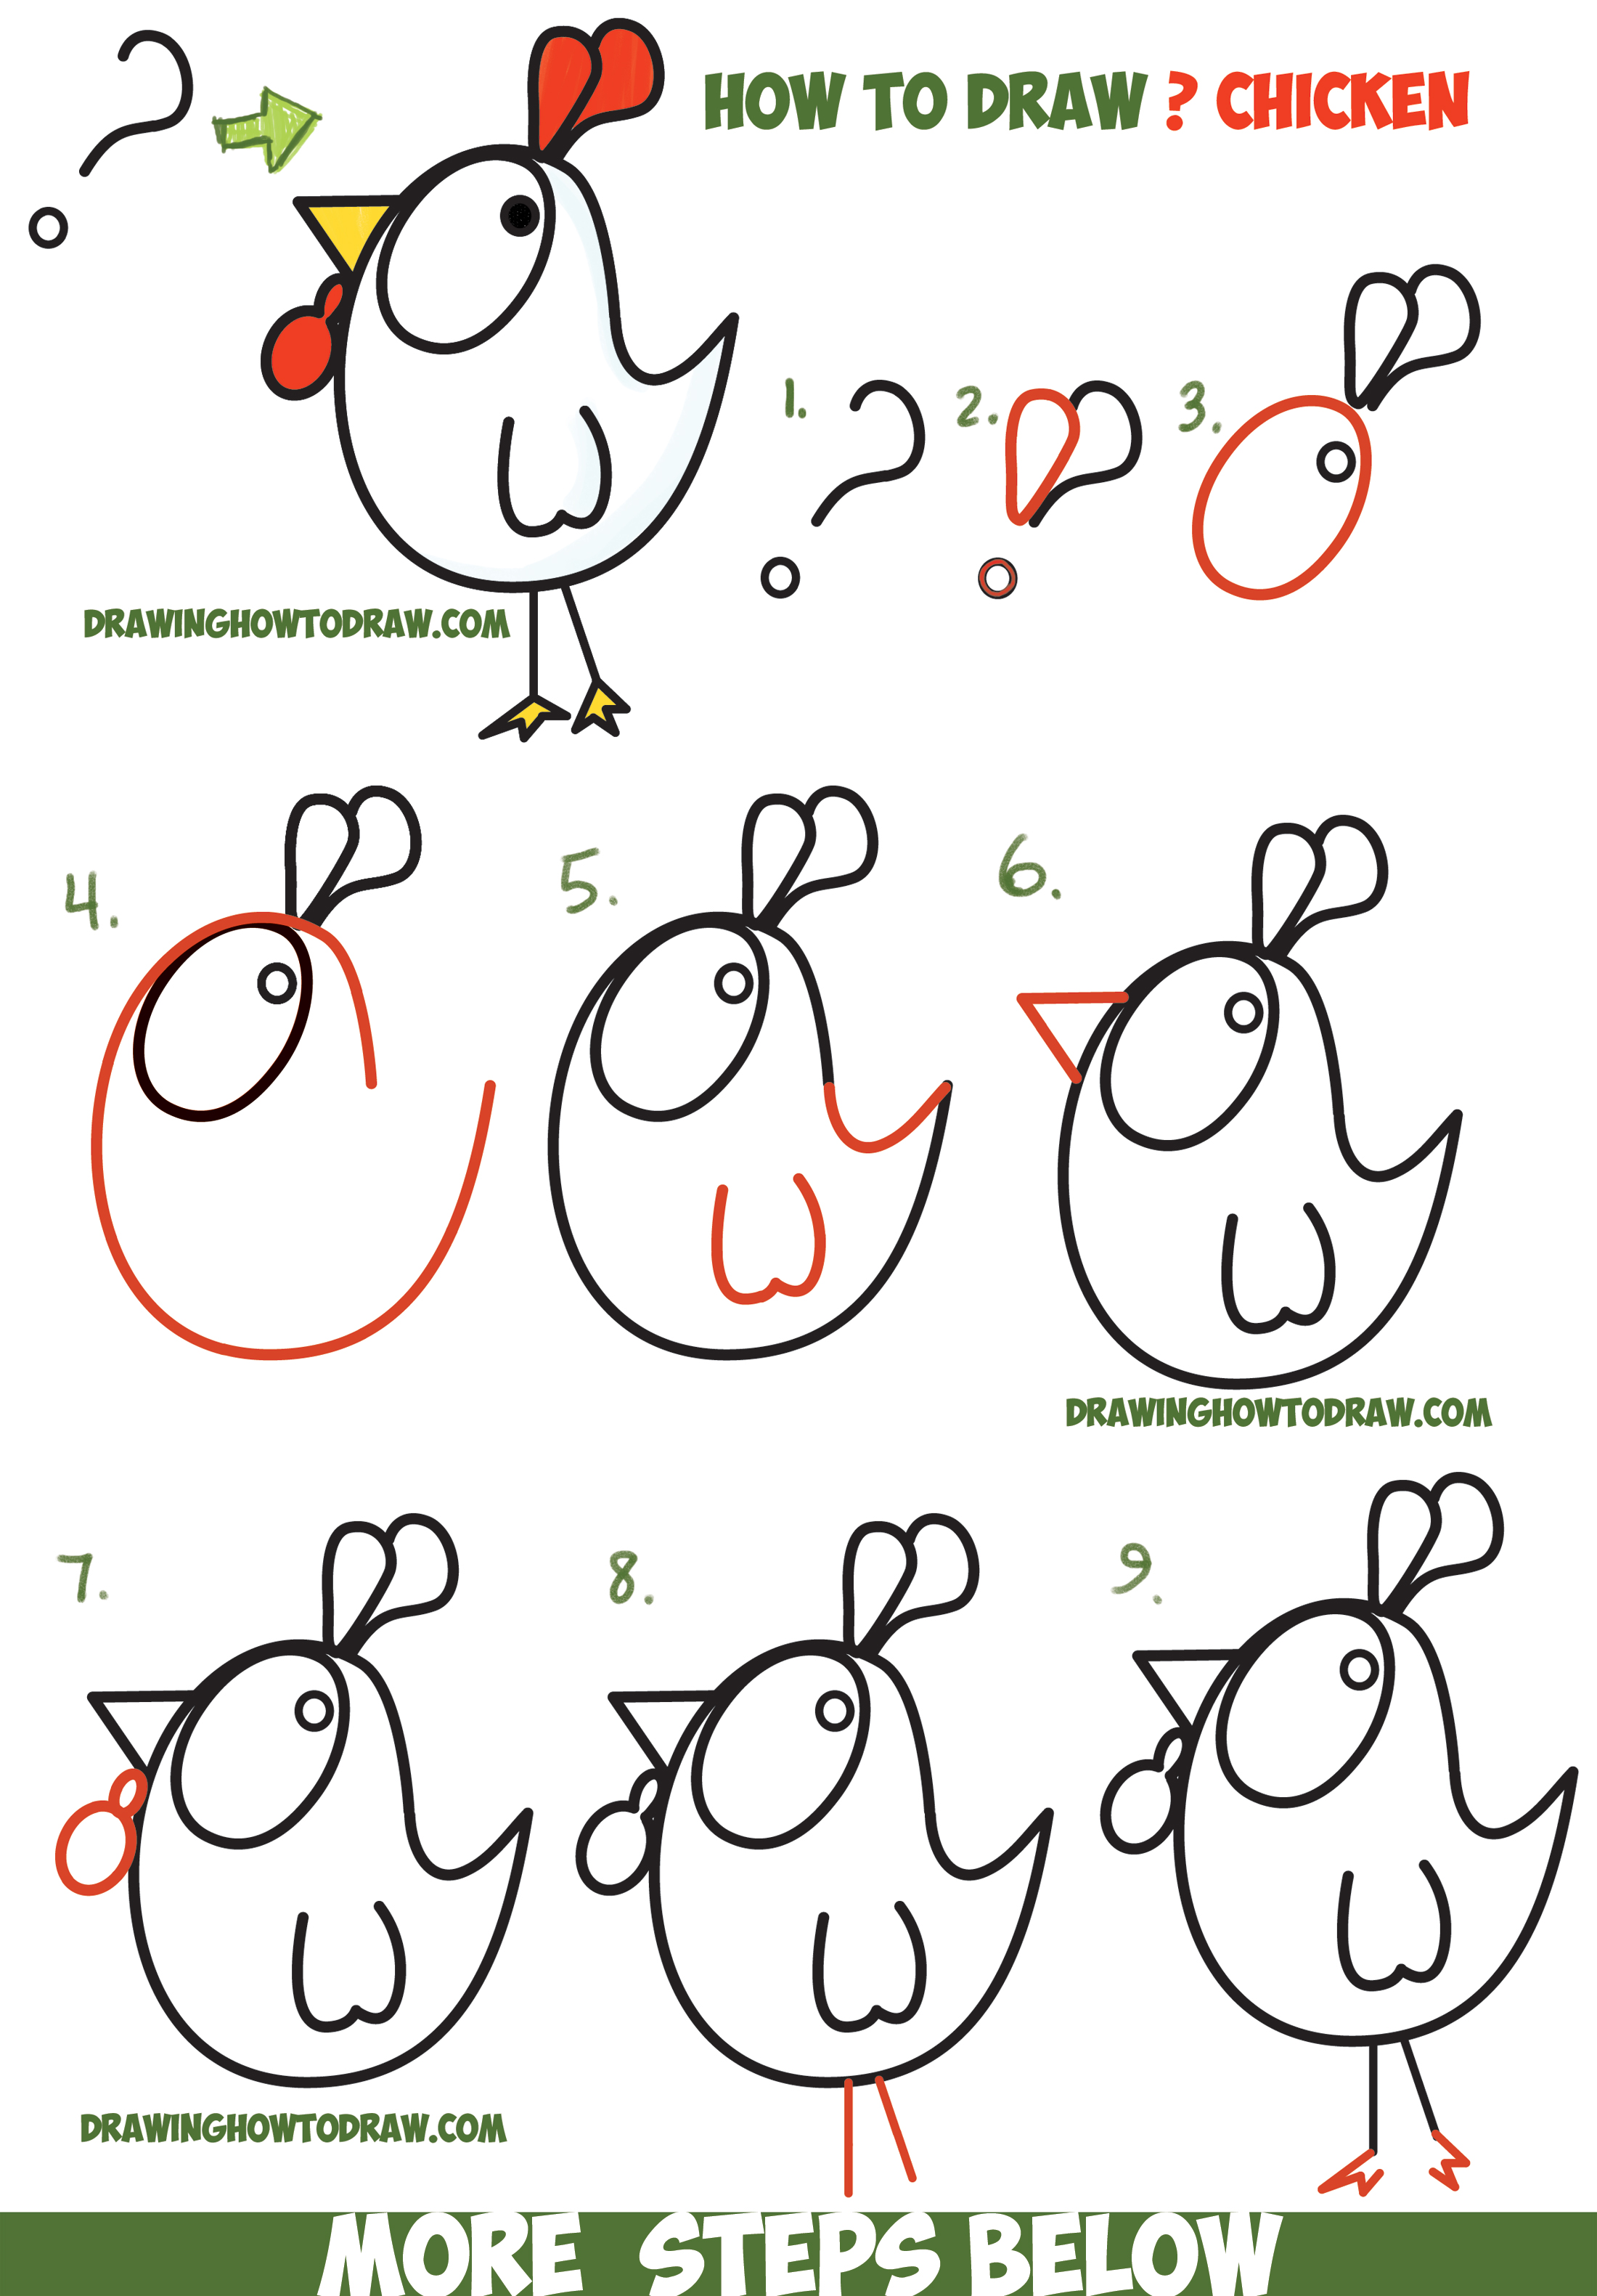 How to Draw a Cartoon Chicken / Rooster from ? and ! Shapes Easy Step